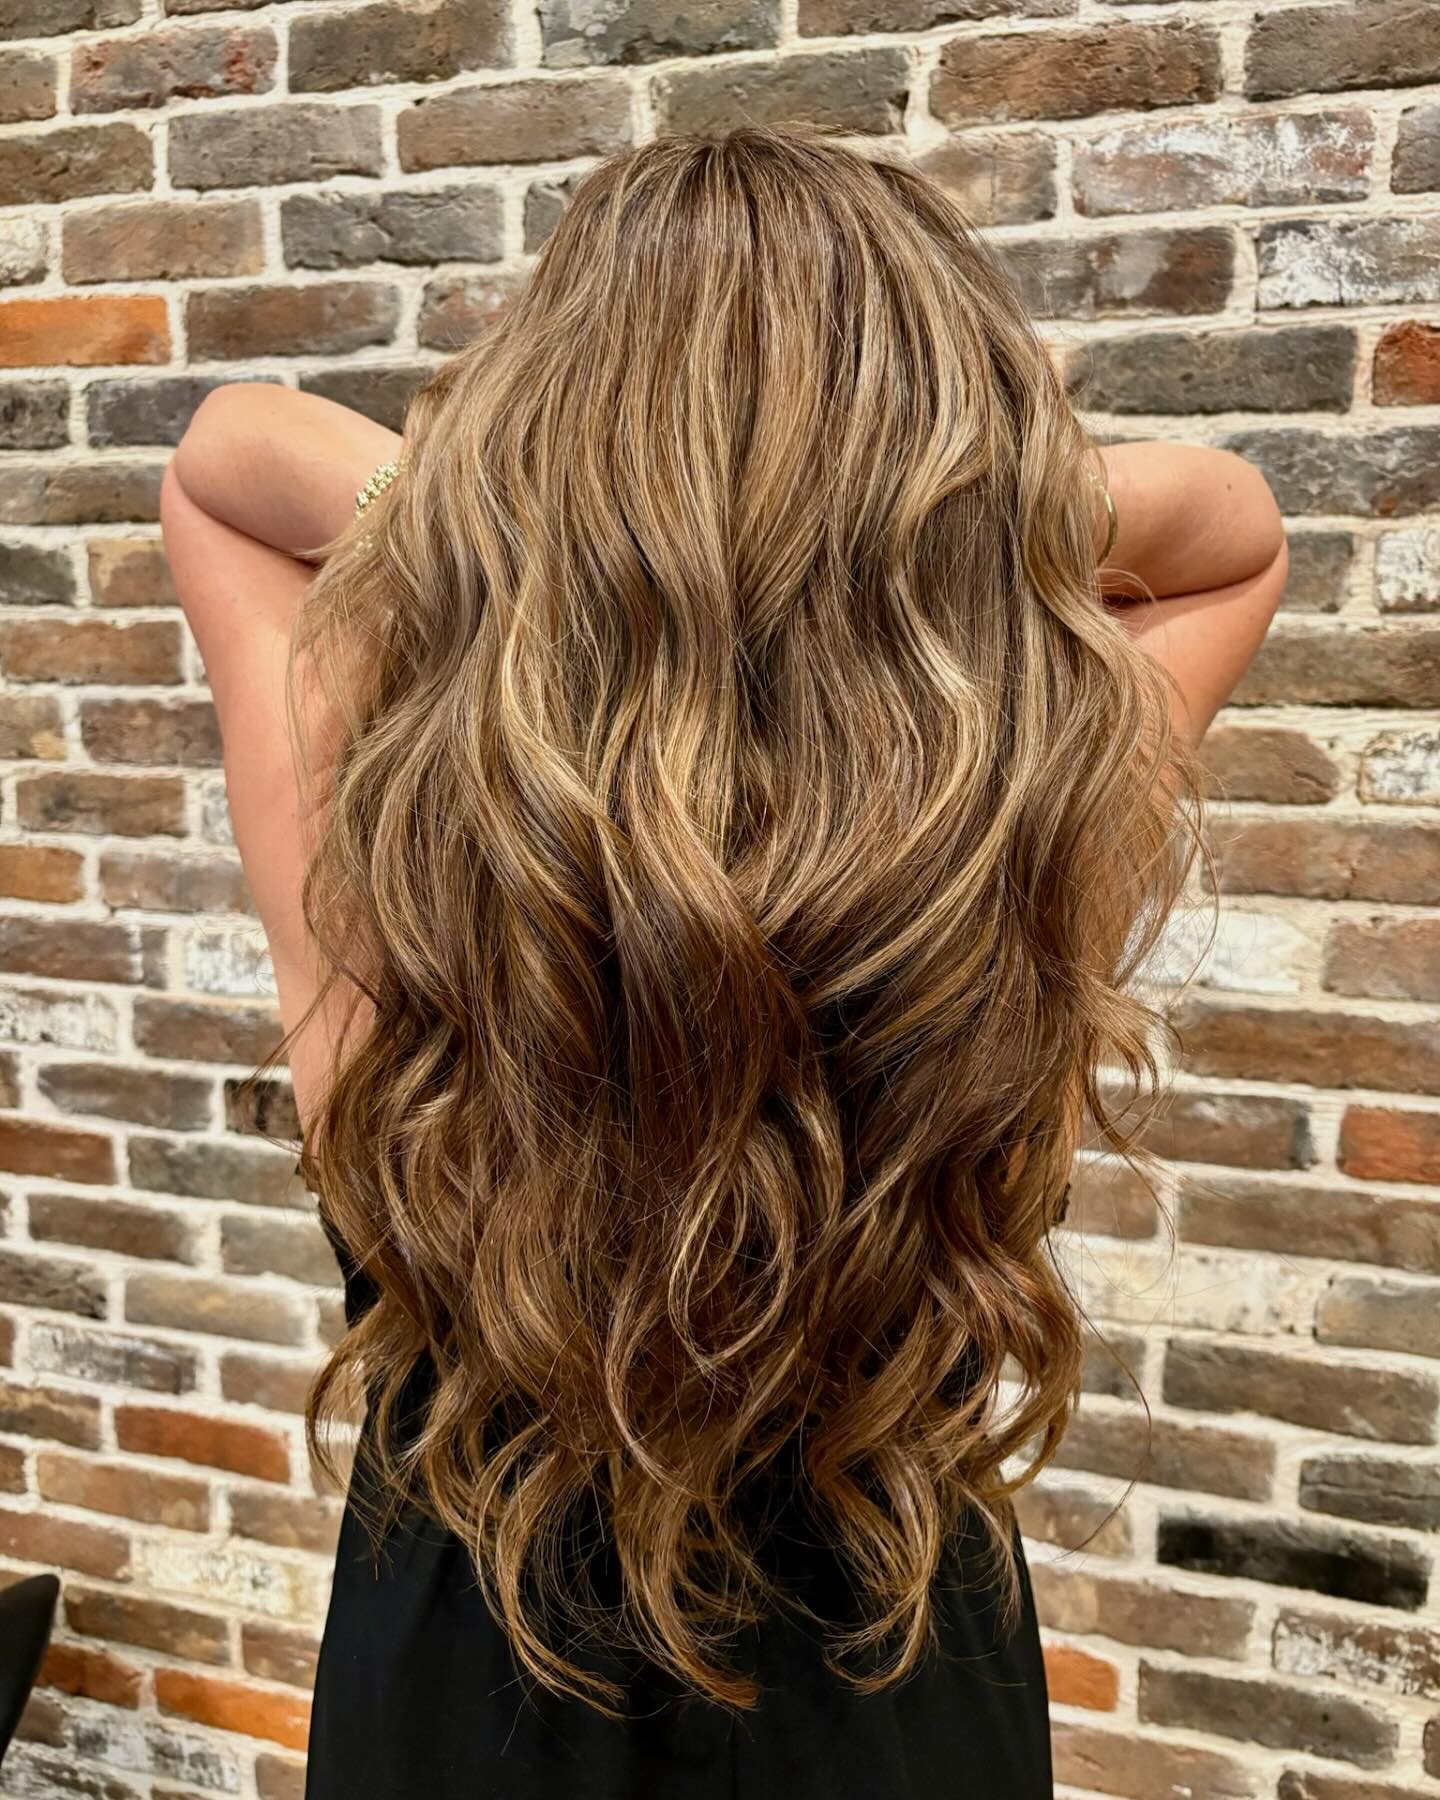 All 👏🏼 That 👏🏼 Hair

Hair by @shannons_style23